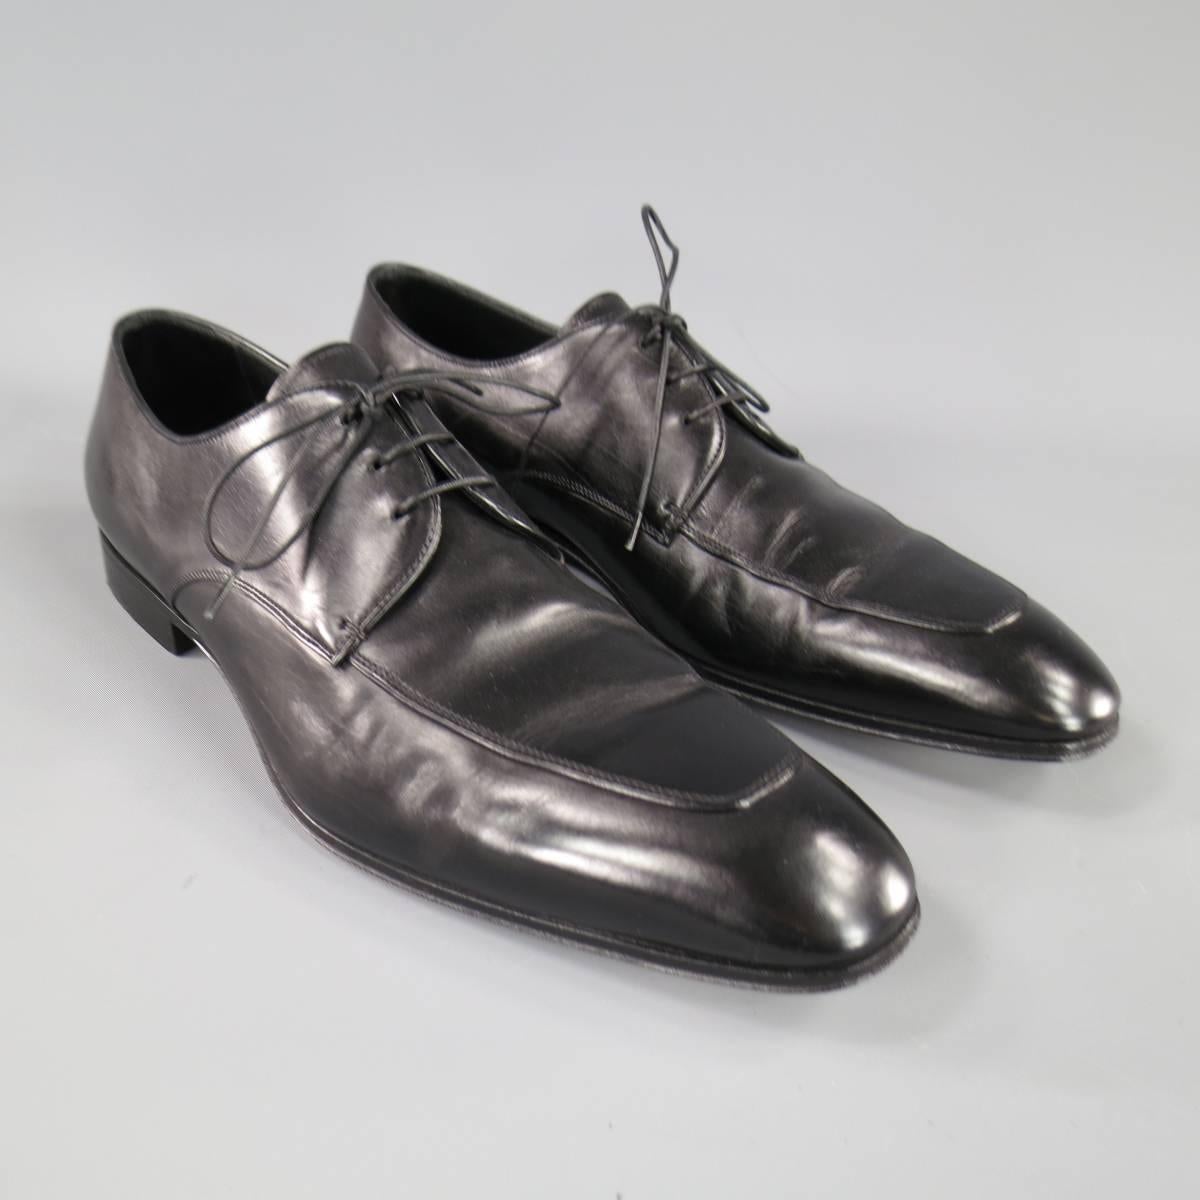 These classic PRADA dress shoes come in smooth black leather and features a lace up front and pointed toe with top stitch detail. Made in Italy.
 
Very Good Pre-Owned Condition.
Marked: 9 1/2
 
Measurements:
 
Length: 12.75 in.
Width: 4 in.